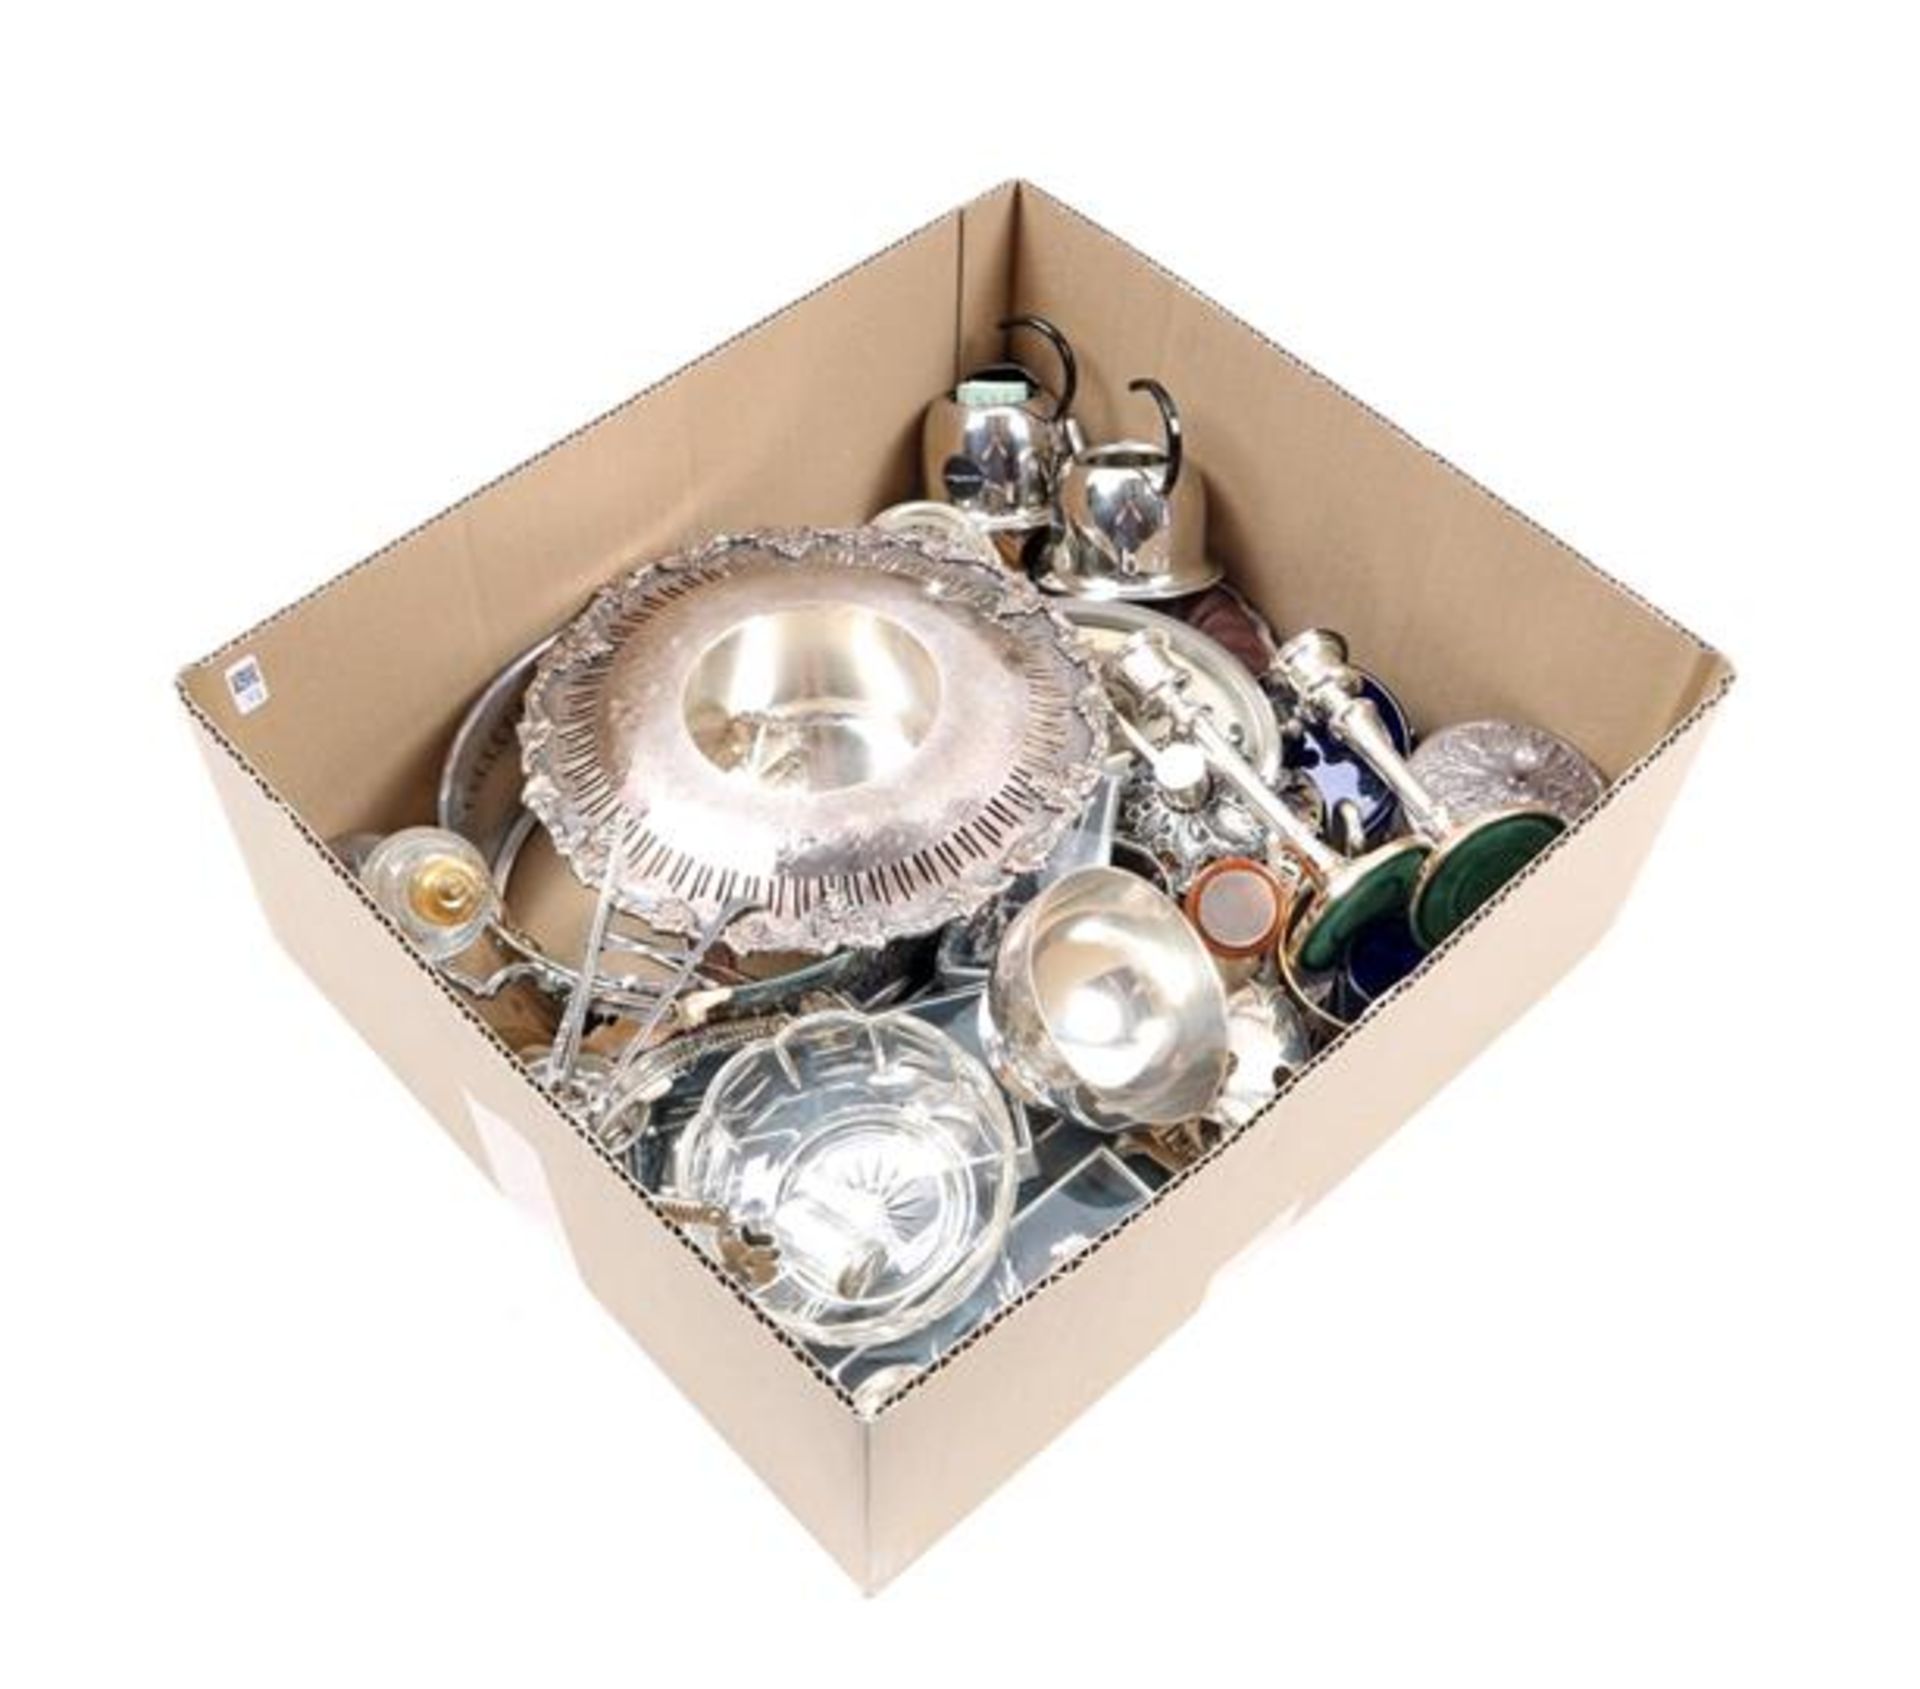 Box variously silver-plated, including cutlery, dishes and candlesticks